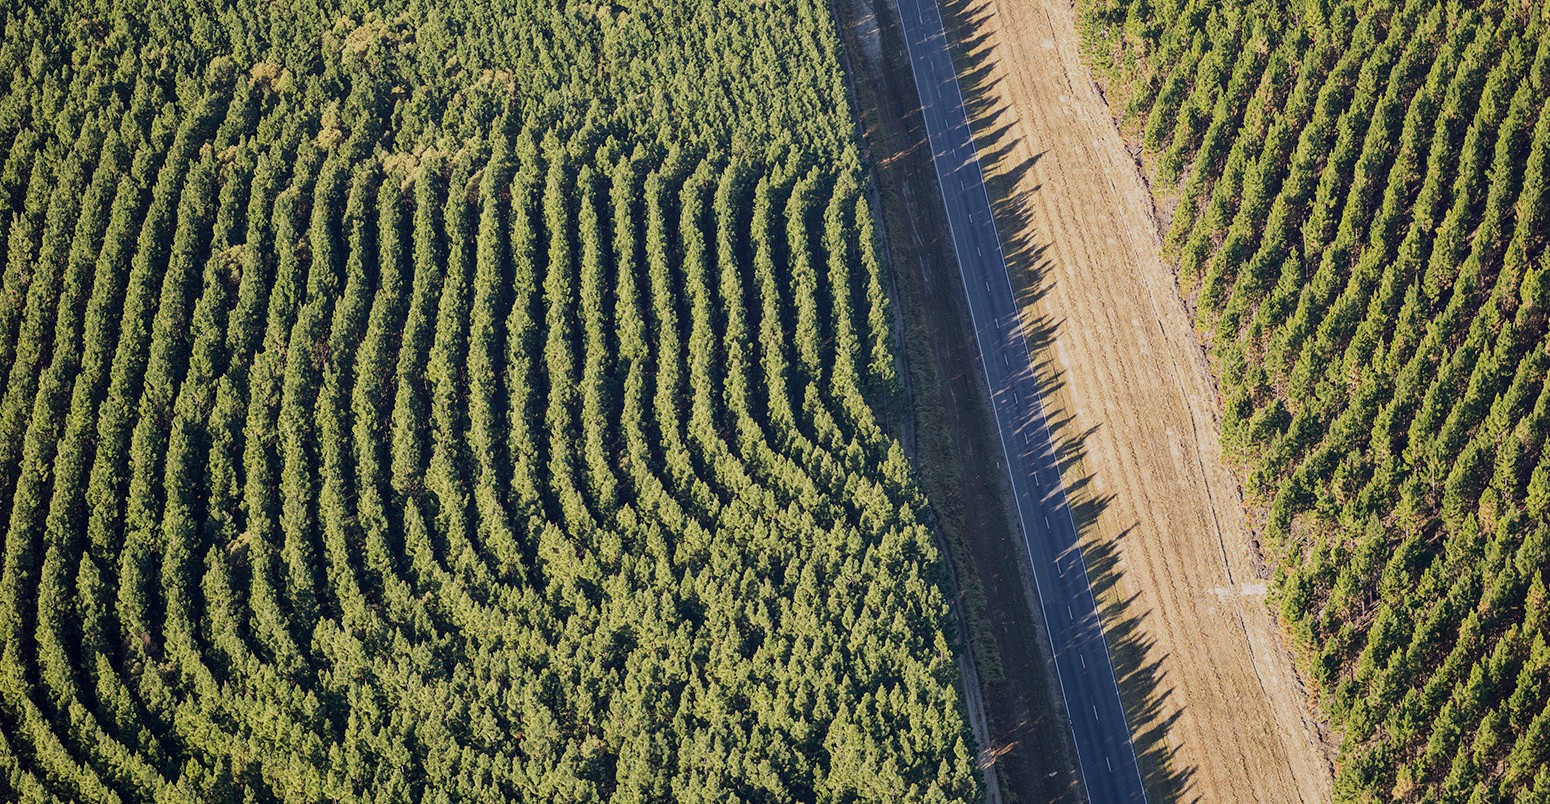 Aerial view of forestry plantations